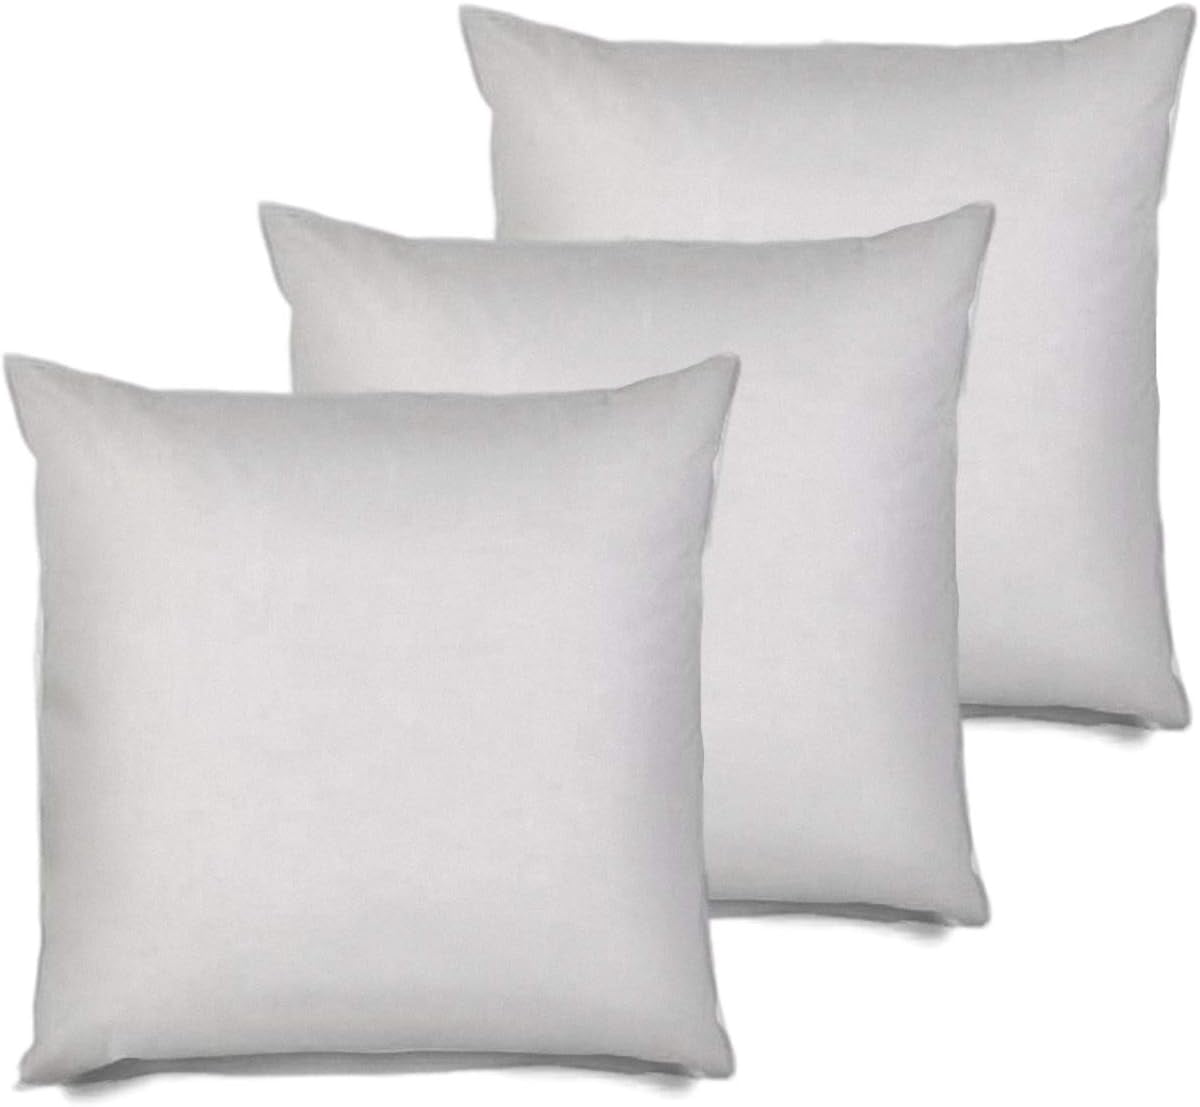 Fixwal 24x24 Inch Throw Pillow Inserts Set of 4, White Polyester Indoor  Decorative Pillow Inserts, Square Form Pillow Stuffer for Bed Couch Car